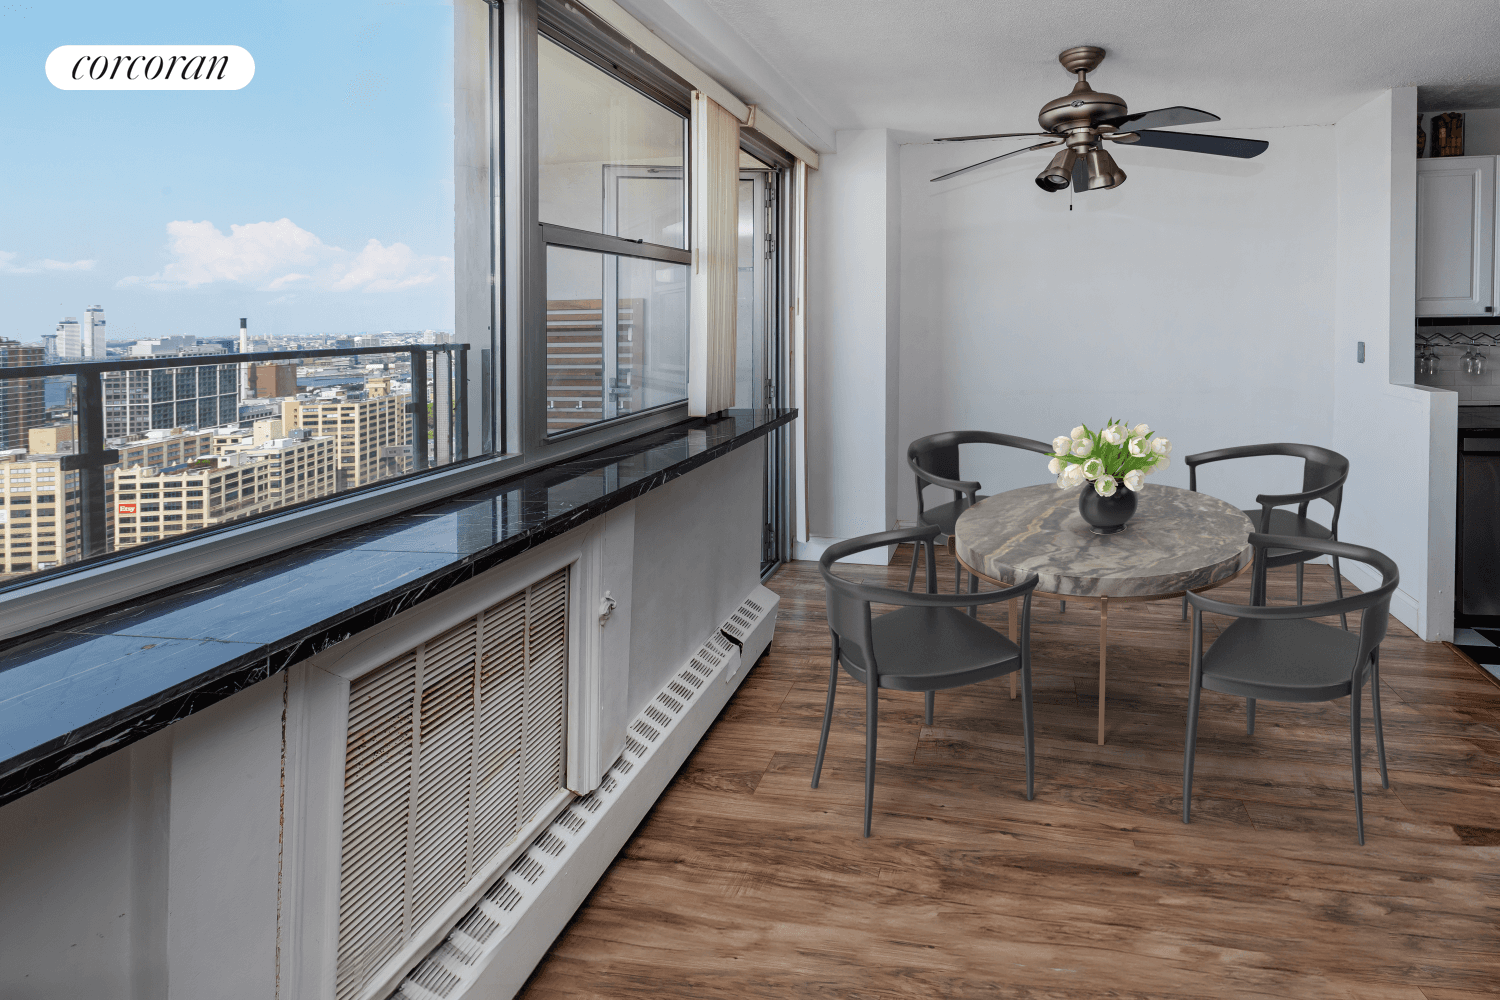 Exquisite Studio Apartment with Breathtaking Terrace in Brooklyn HeightsStep into this spacious studio apartment with exceptionally low maintenance costs.